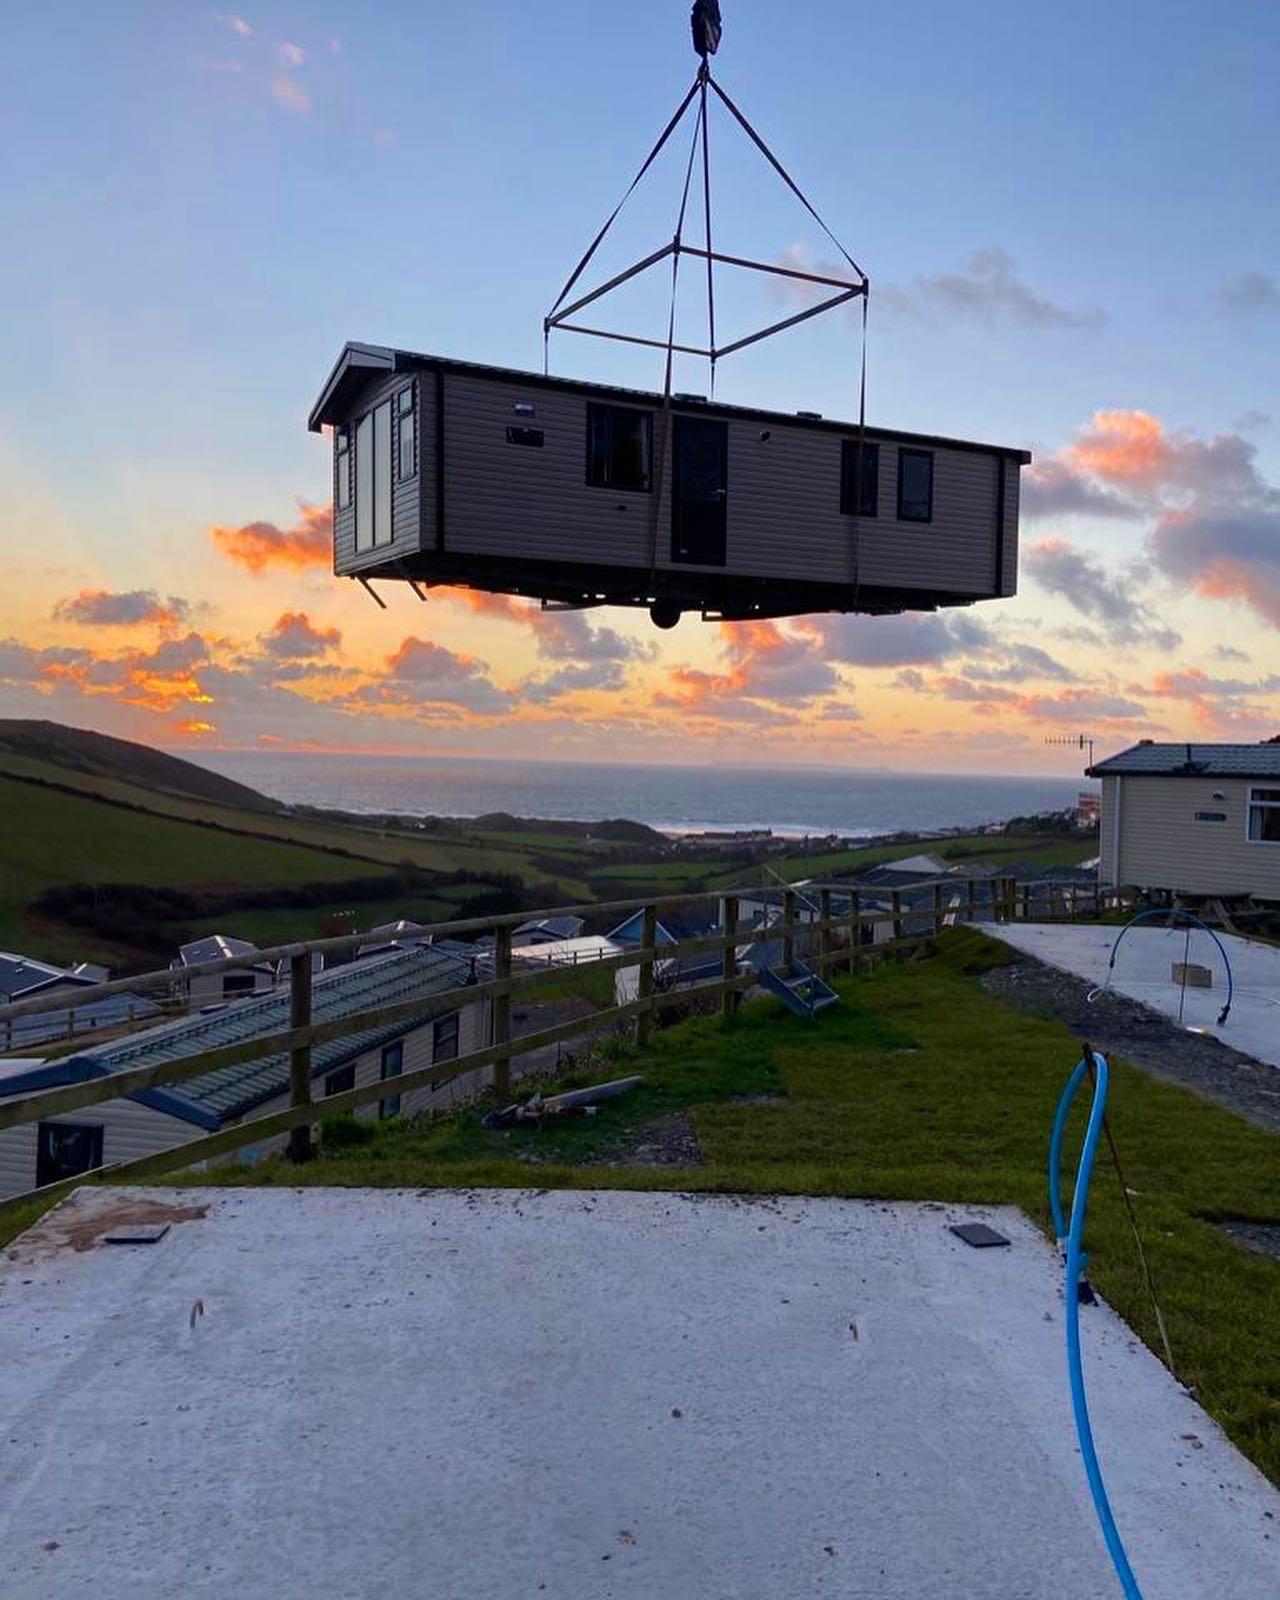 Caravans being craned into position at Woolacombe Sands Holiday Park